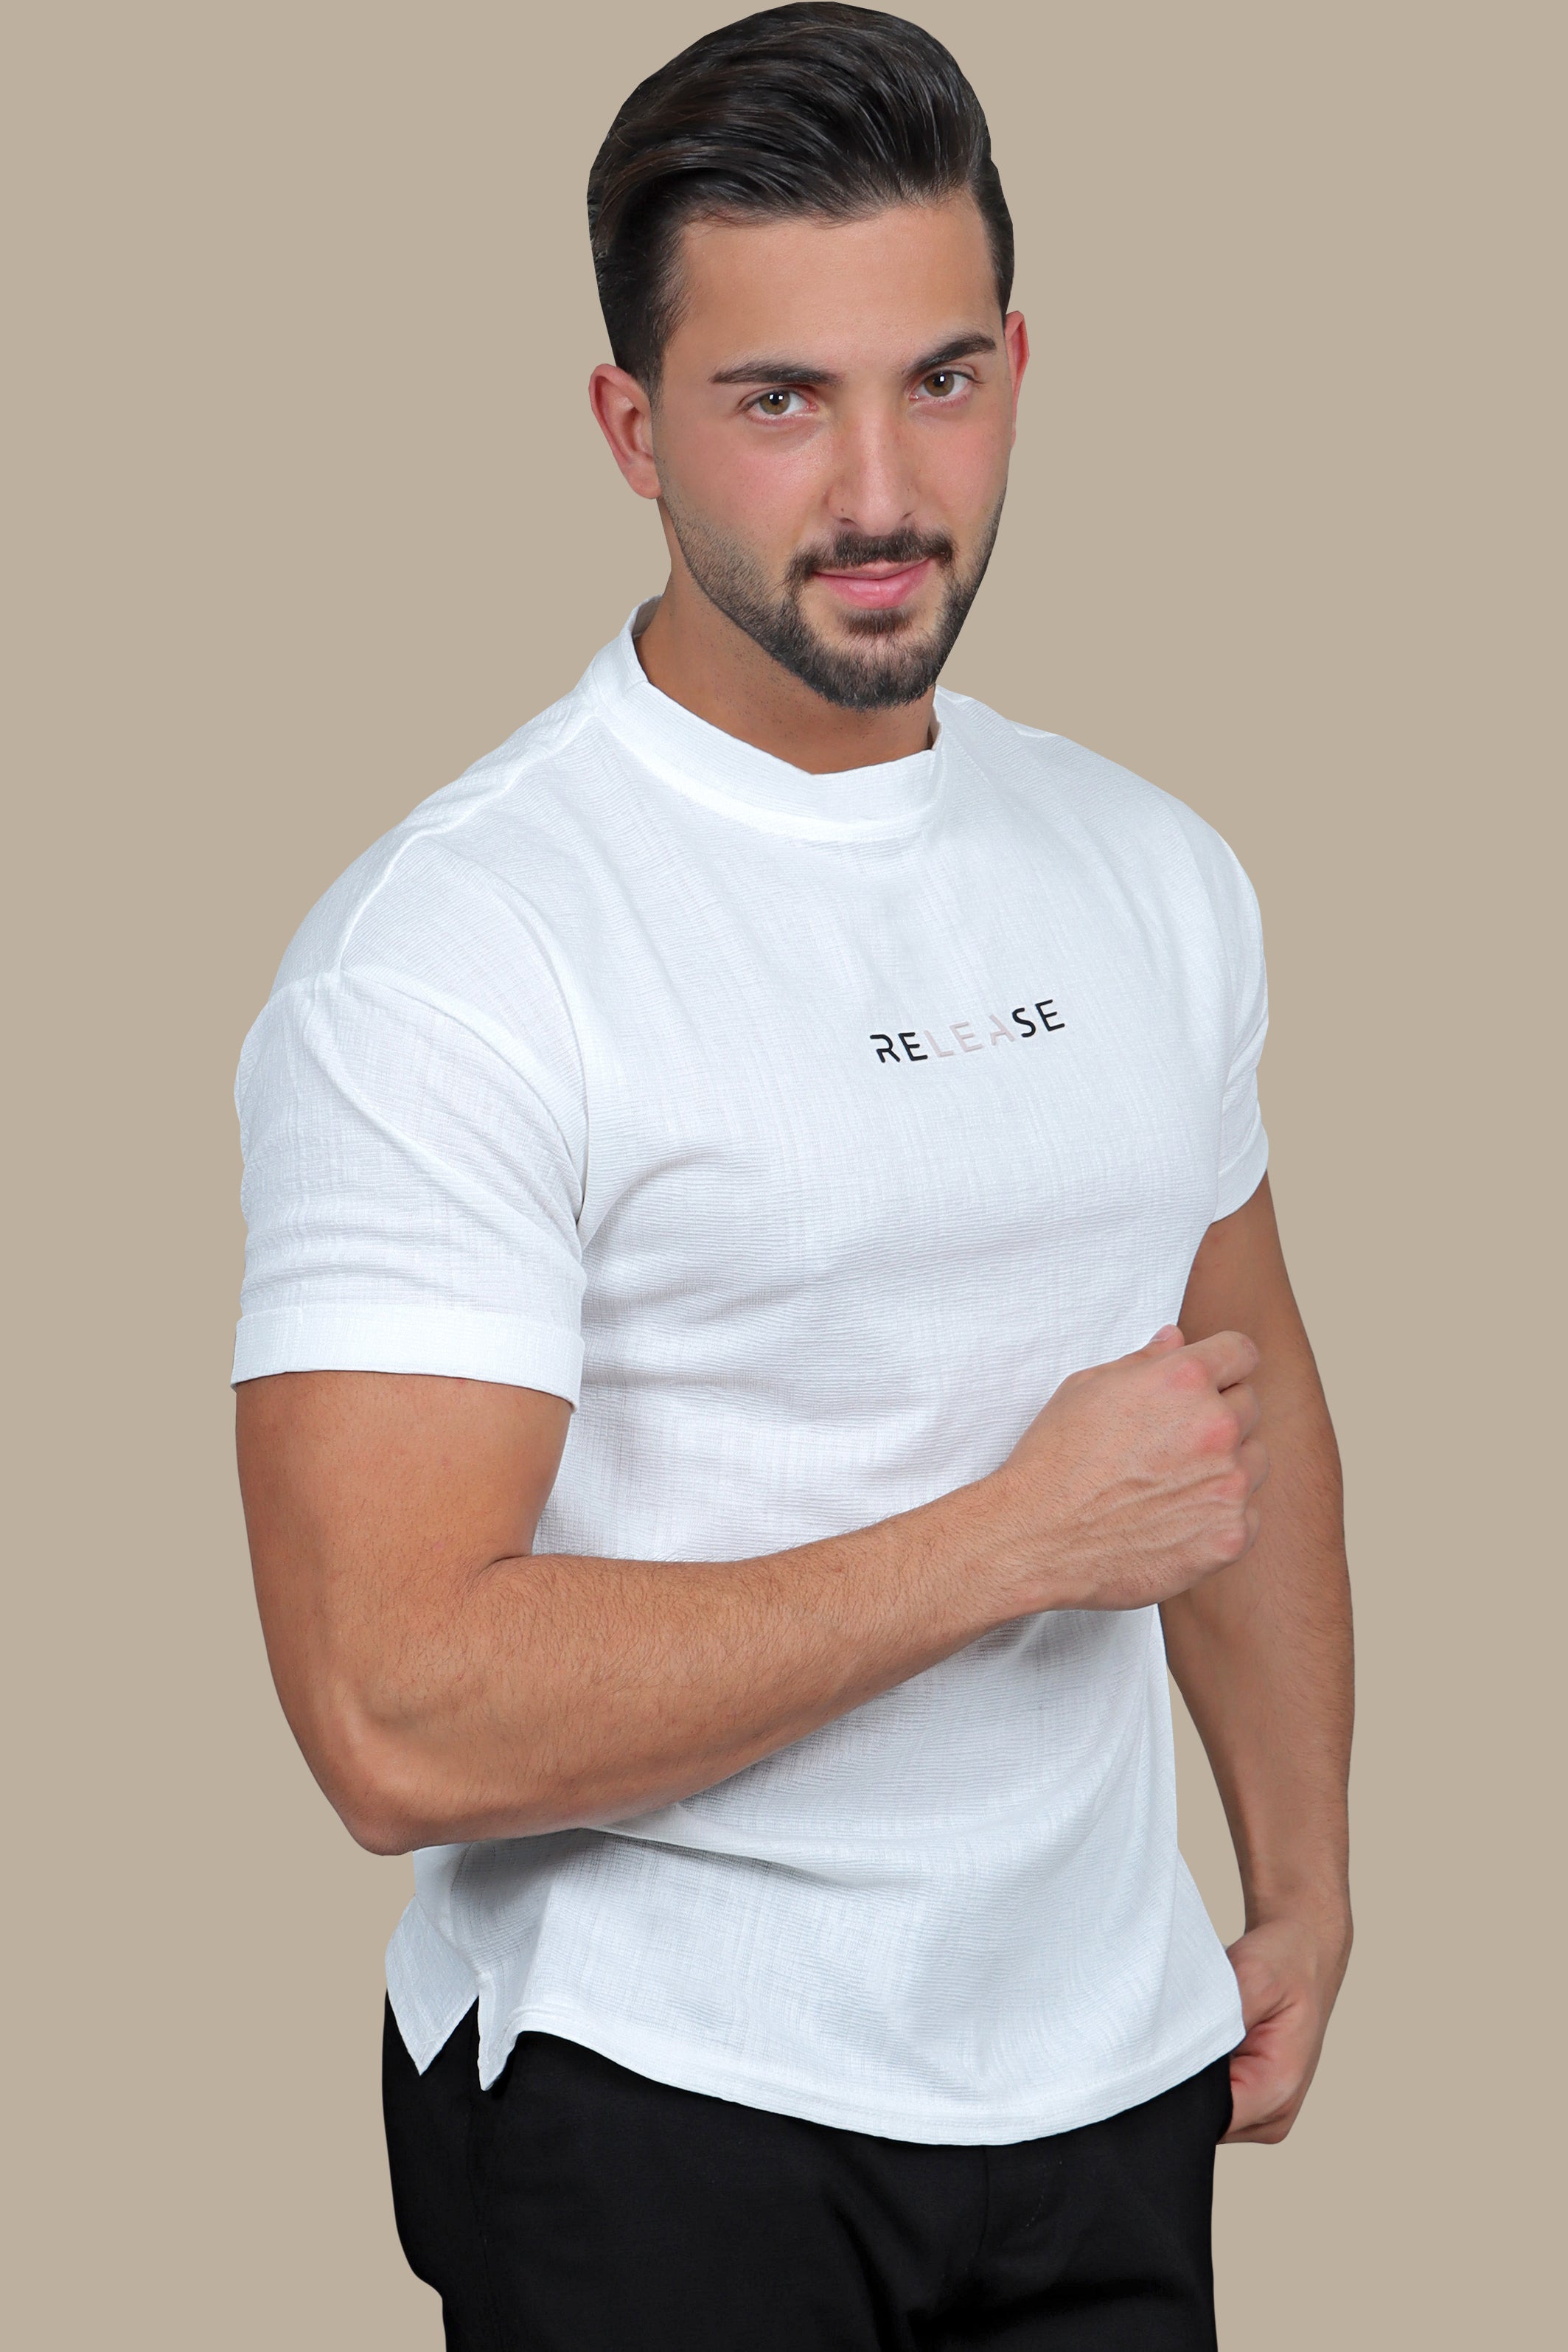 Pure Comfort: White T-Shirt Release